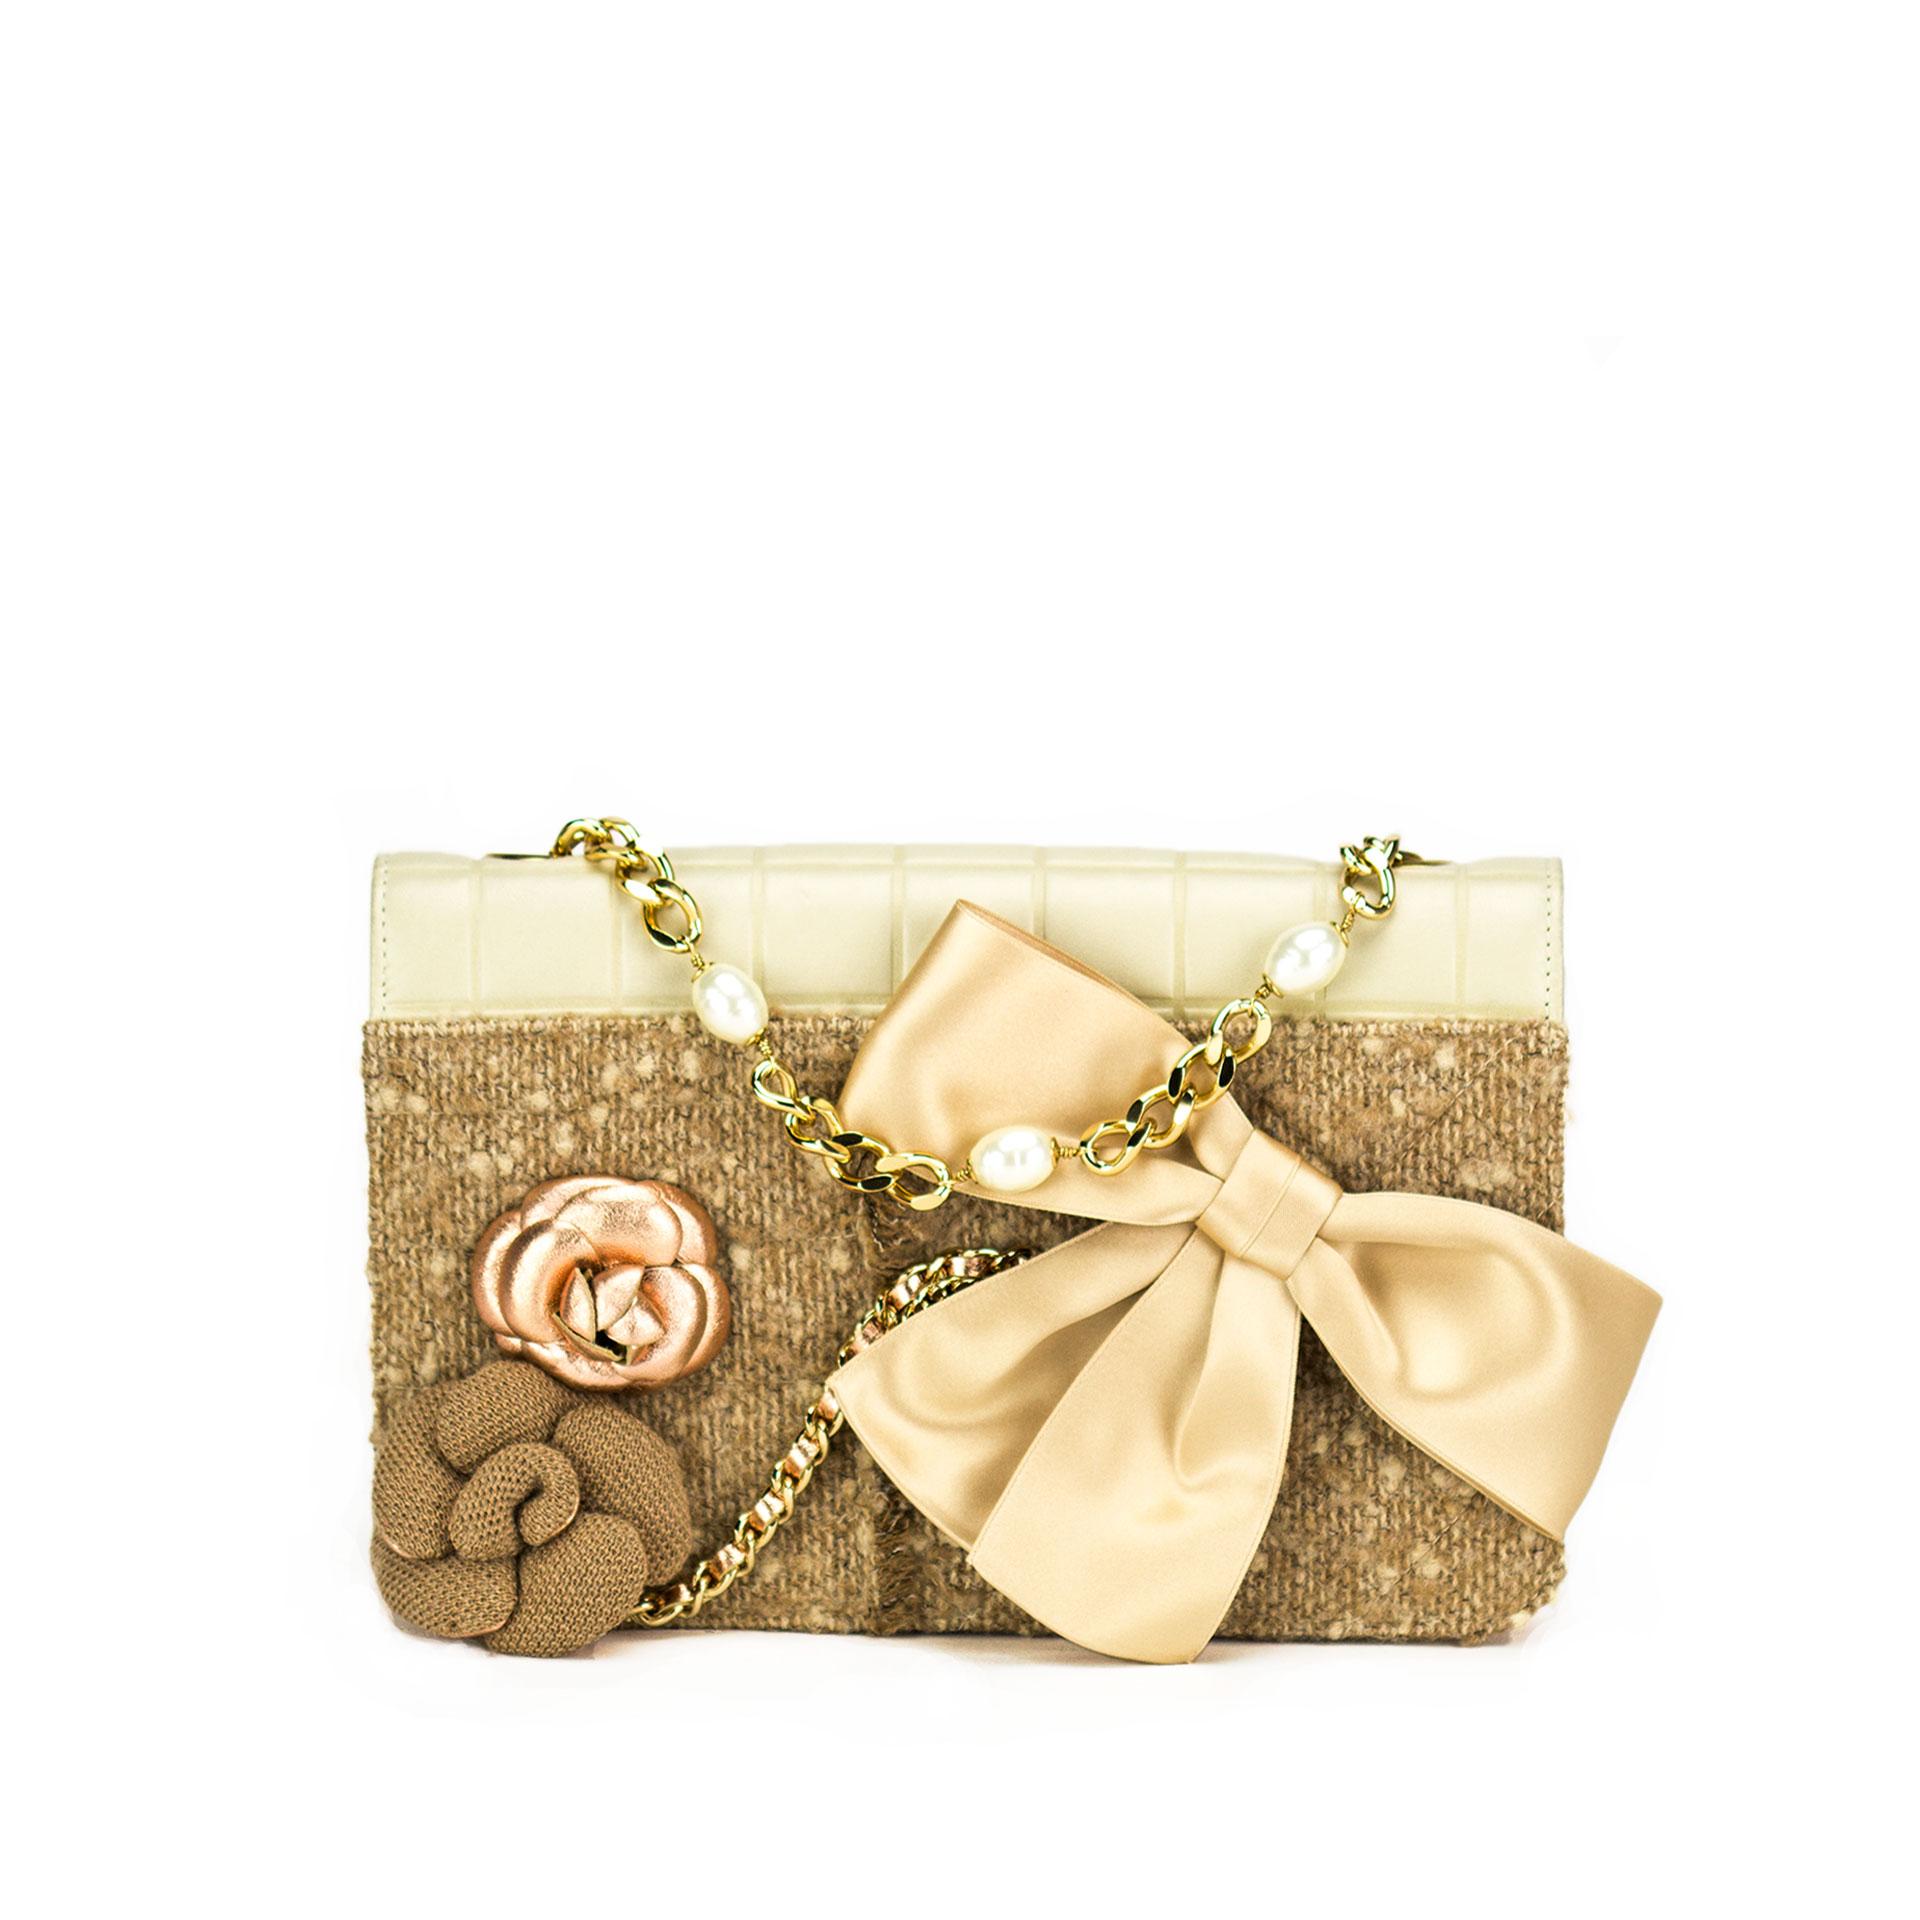 Beige Chanel quilted lambskin and tweed flap with attached camelia flower and bow

2001 {VINTAGE 19 Years}
Gold hardware
Hanging pearl detail
Lion head button detail
Pearl chain
Interior rose gold lining
Interior pocket
Classic back pocket
Strap